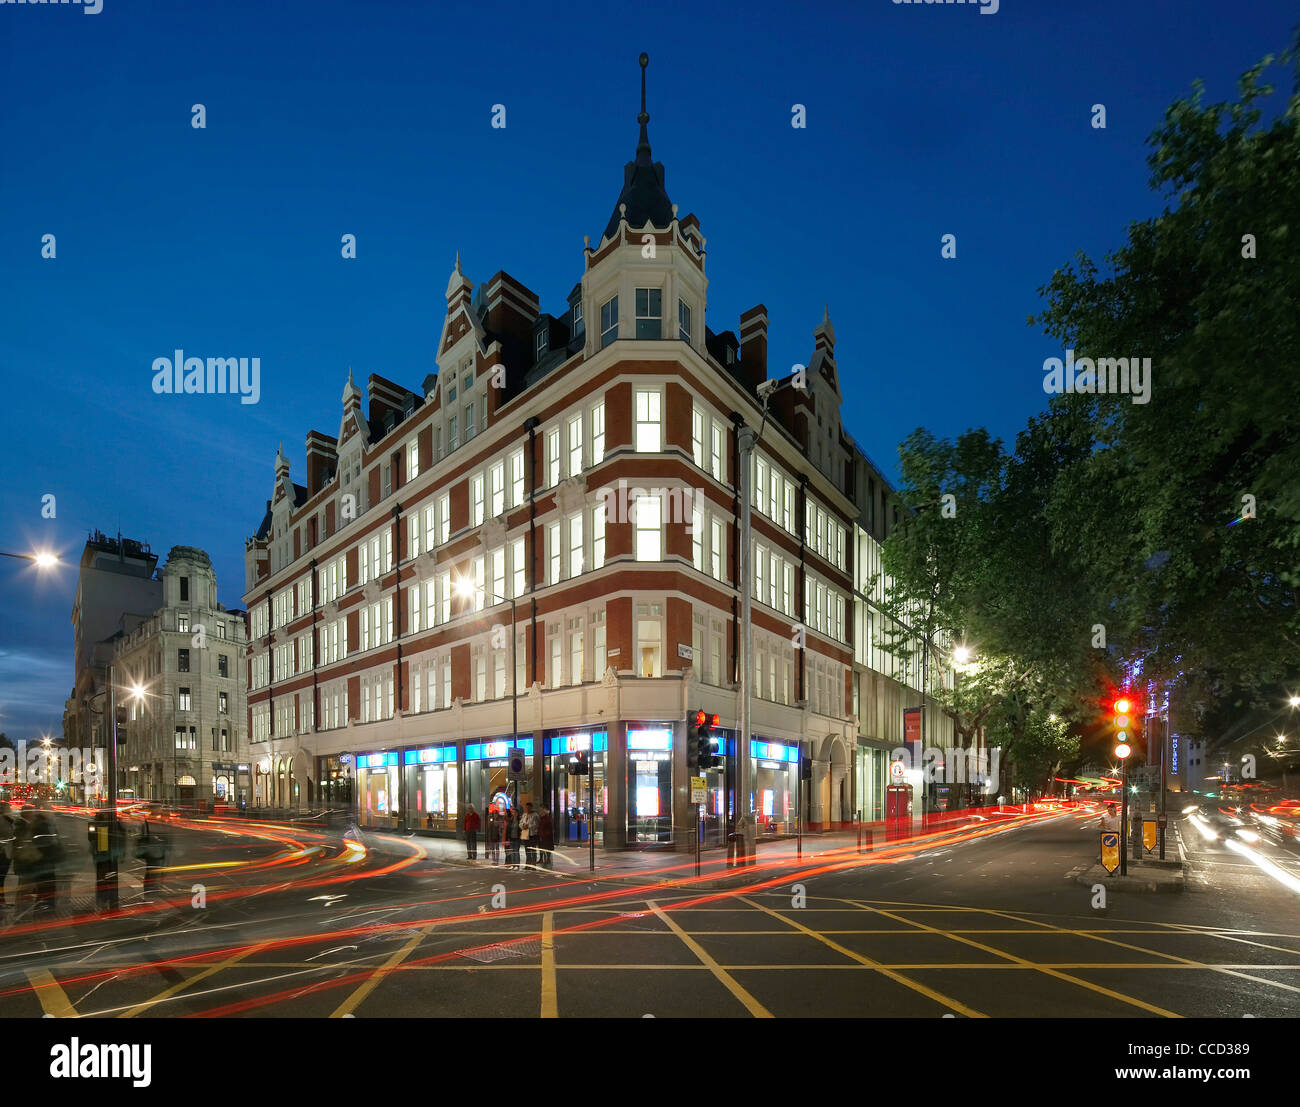 ONE SOUTHAMPTON ROW, SHEPPARD ROBSON, LONDON, 2010, CORNER VIEW OF EXISTING FACADE AT NIGHT Stock Photo